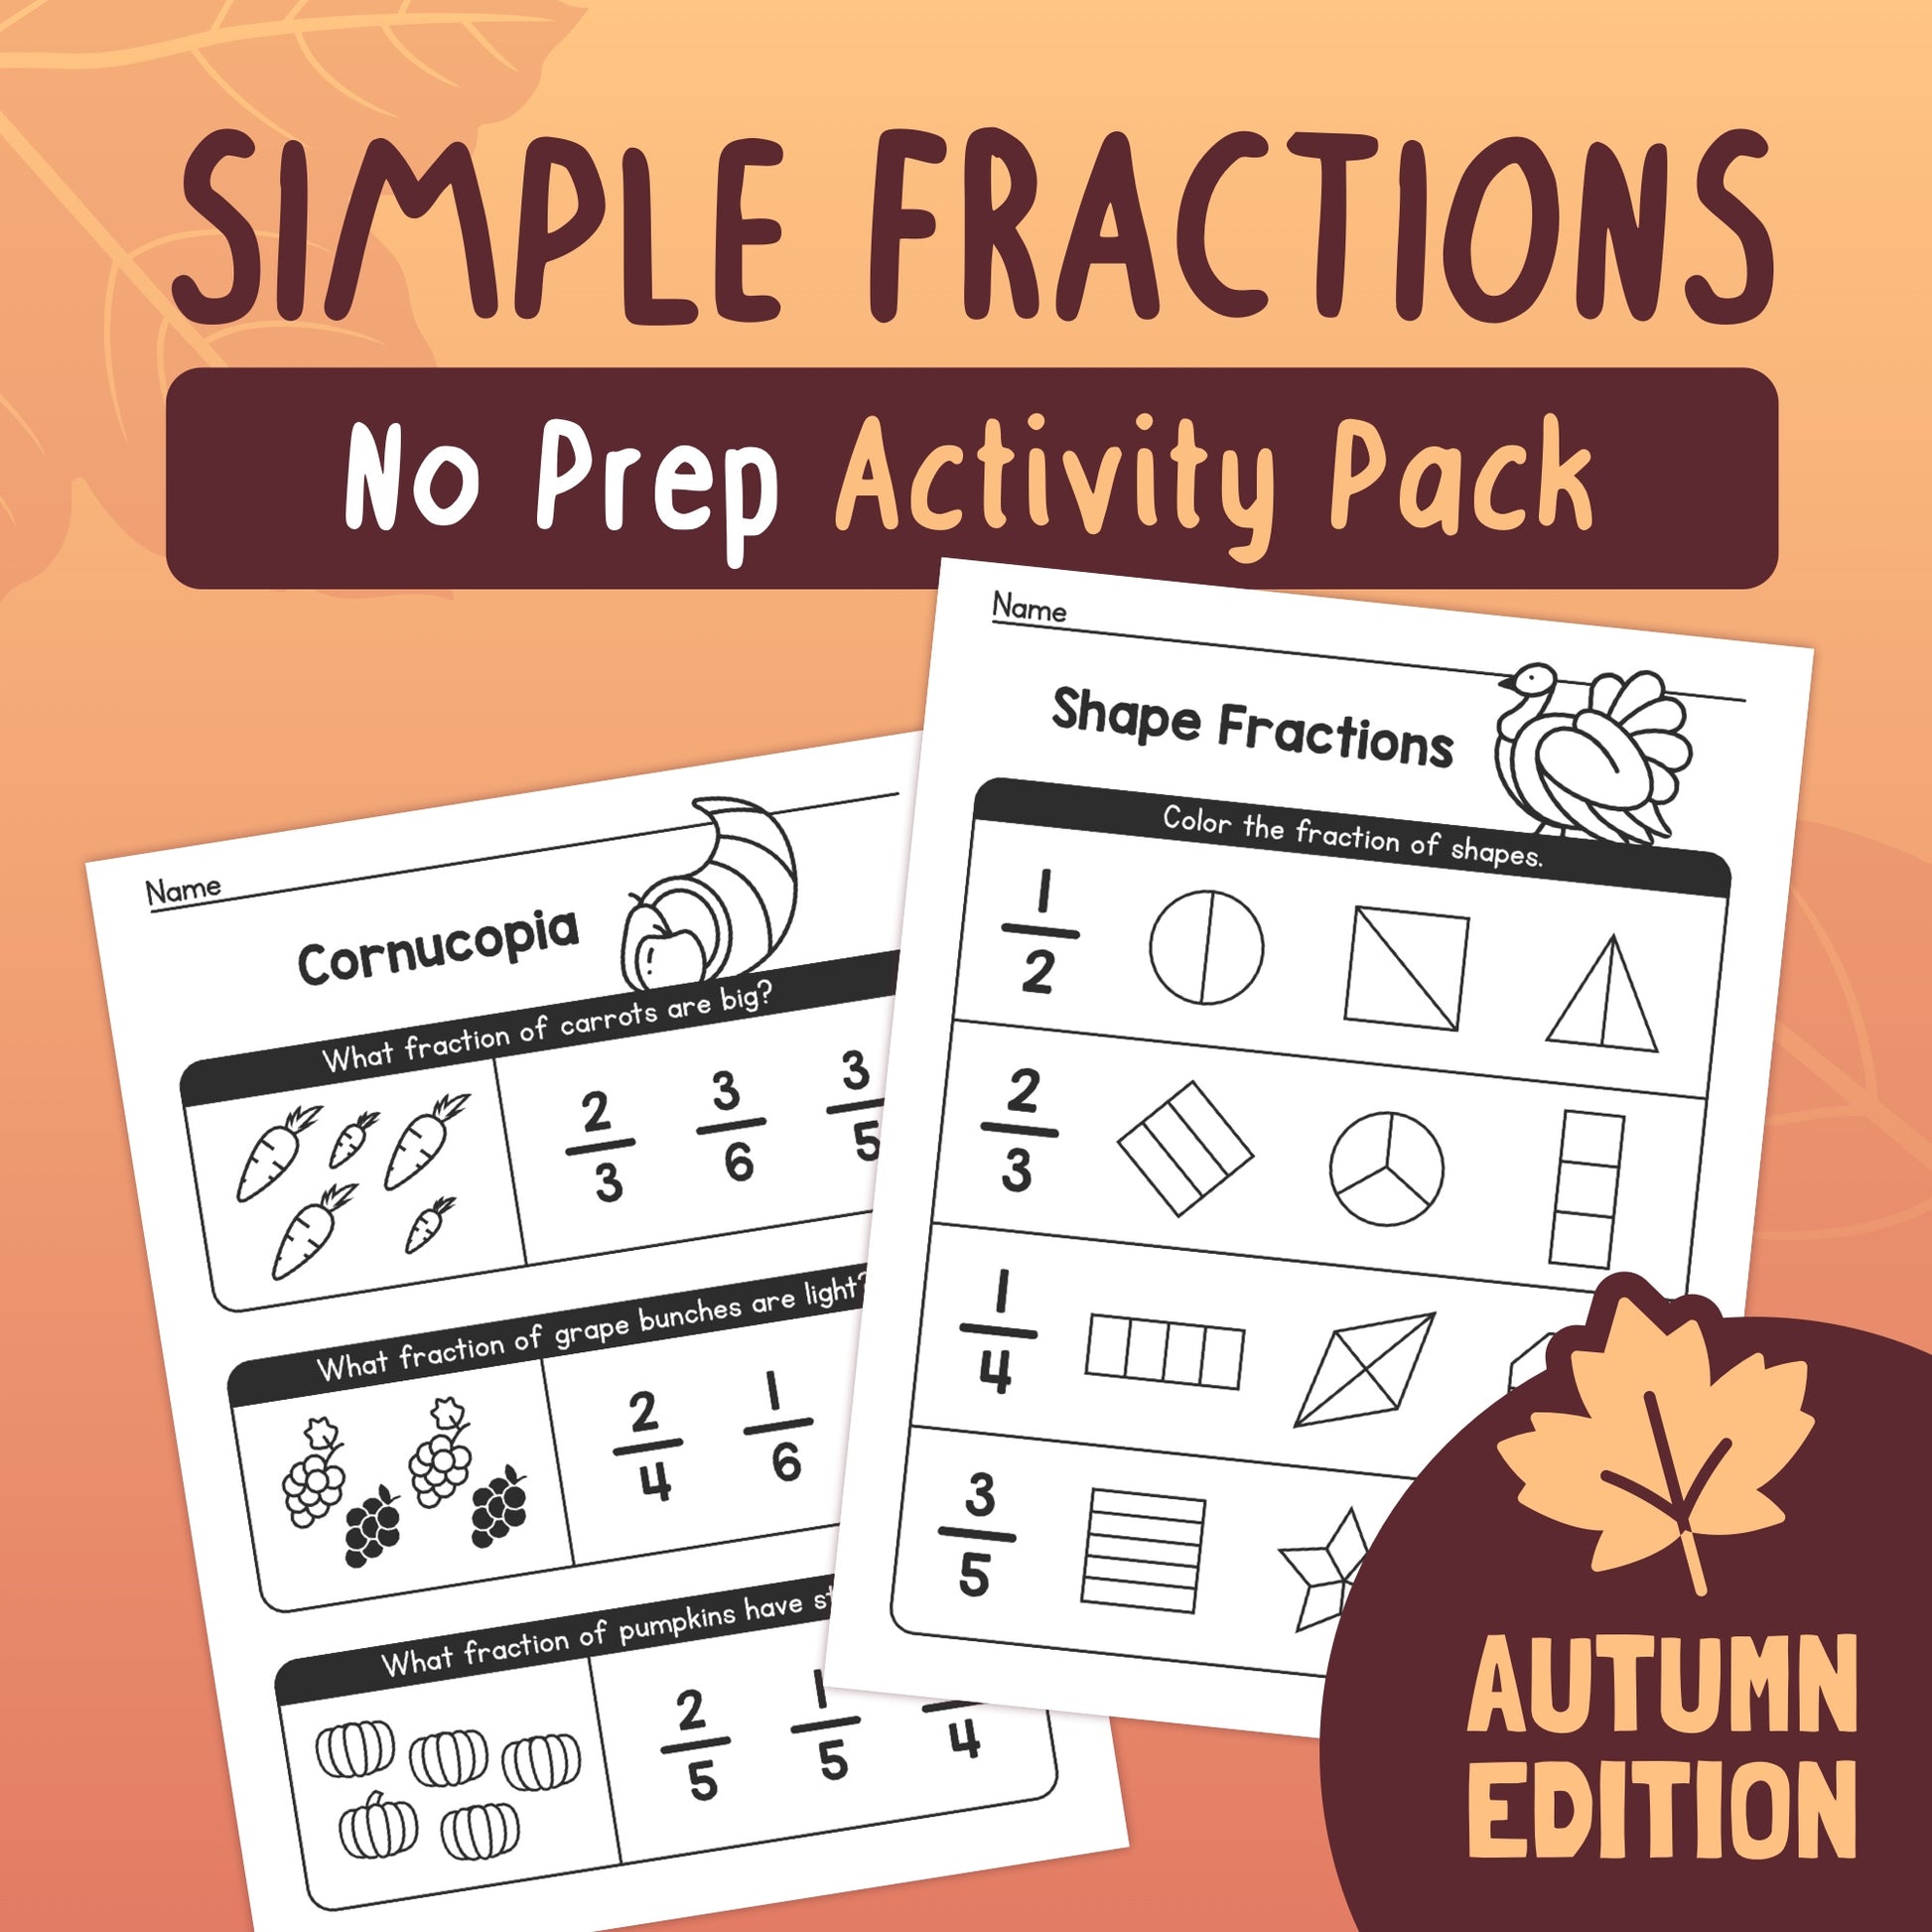 Simple fractions no prep activity pack - autumn edition